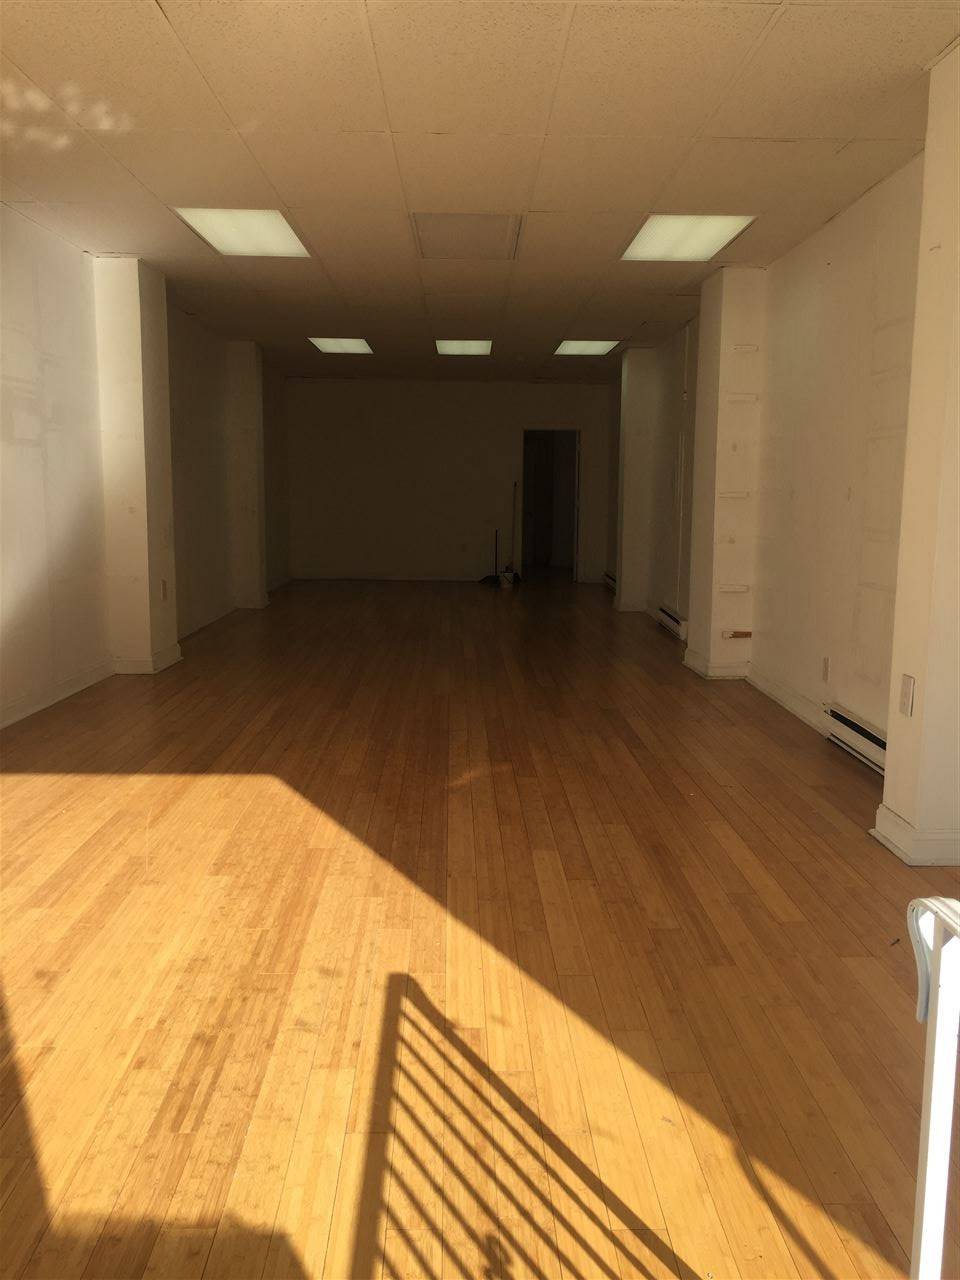 Open the business of your dreams in this gorgeous commercial space